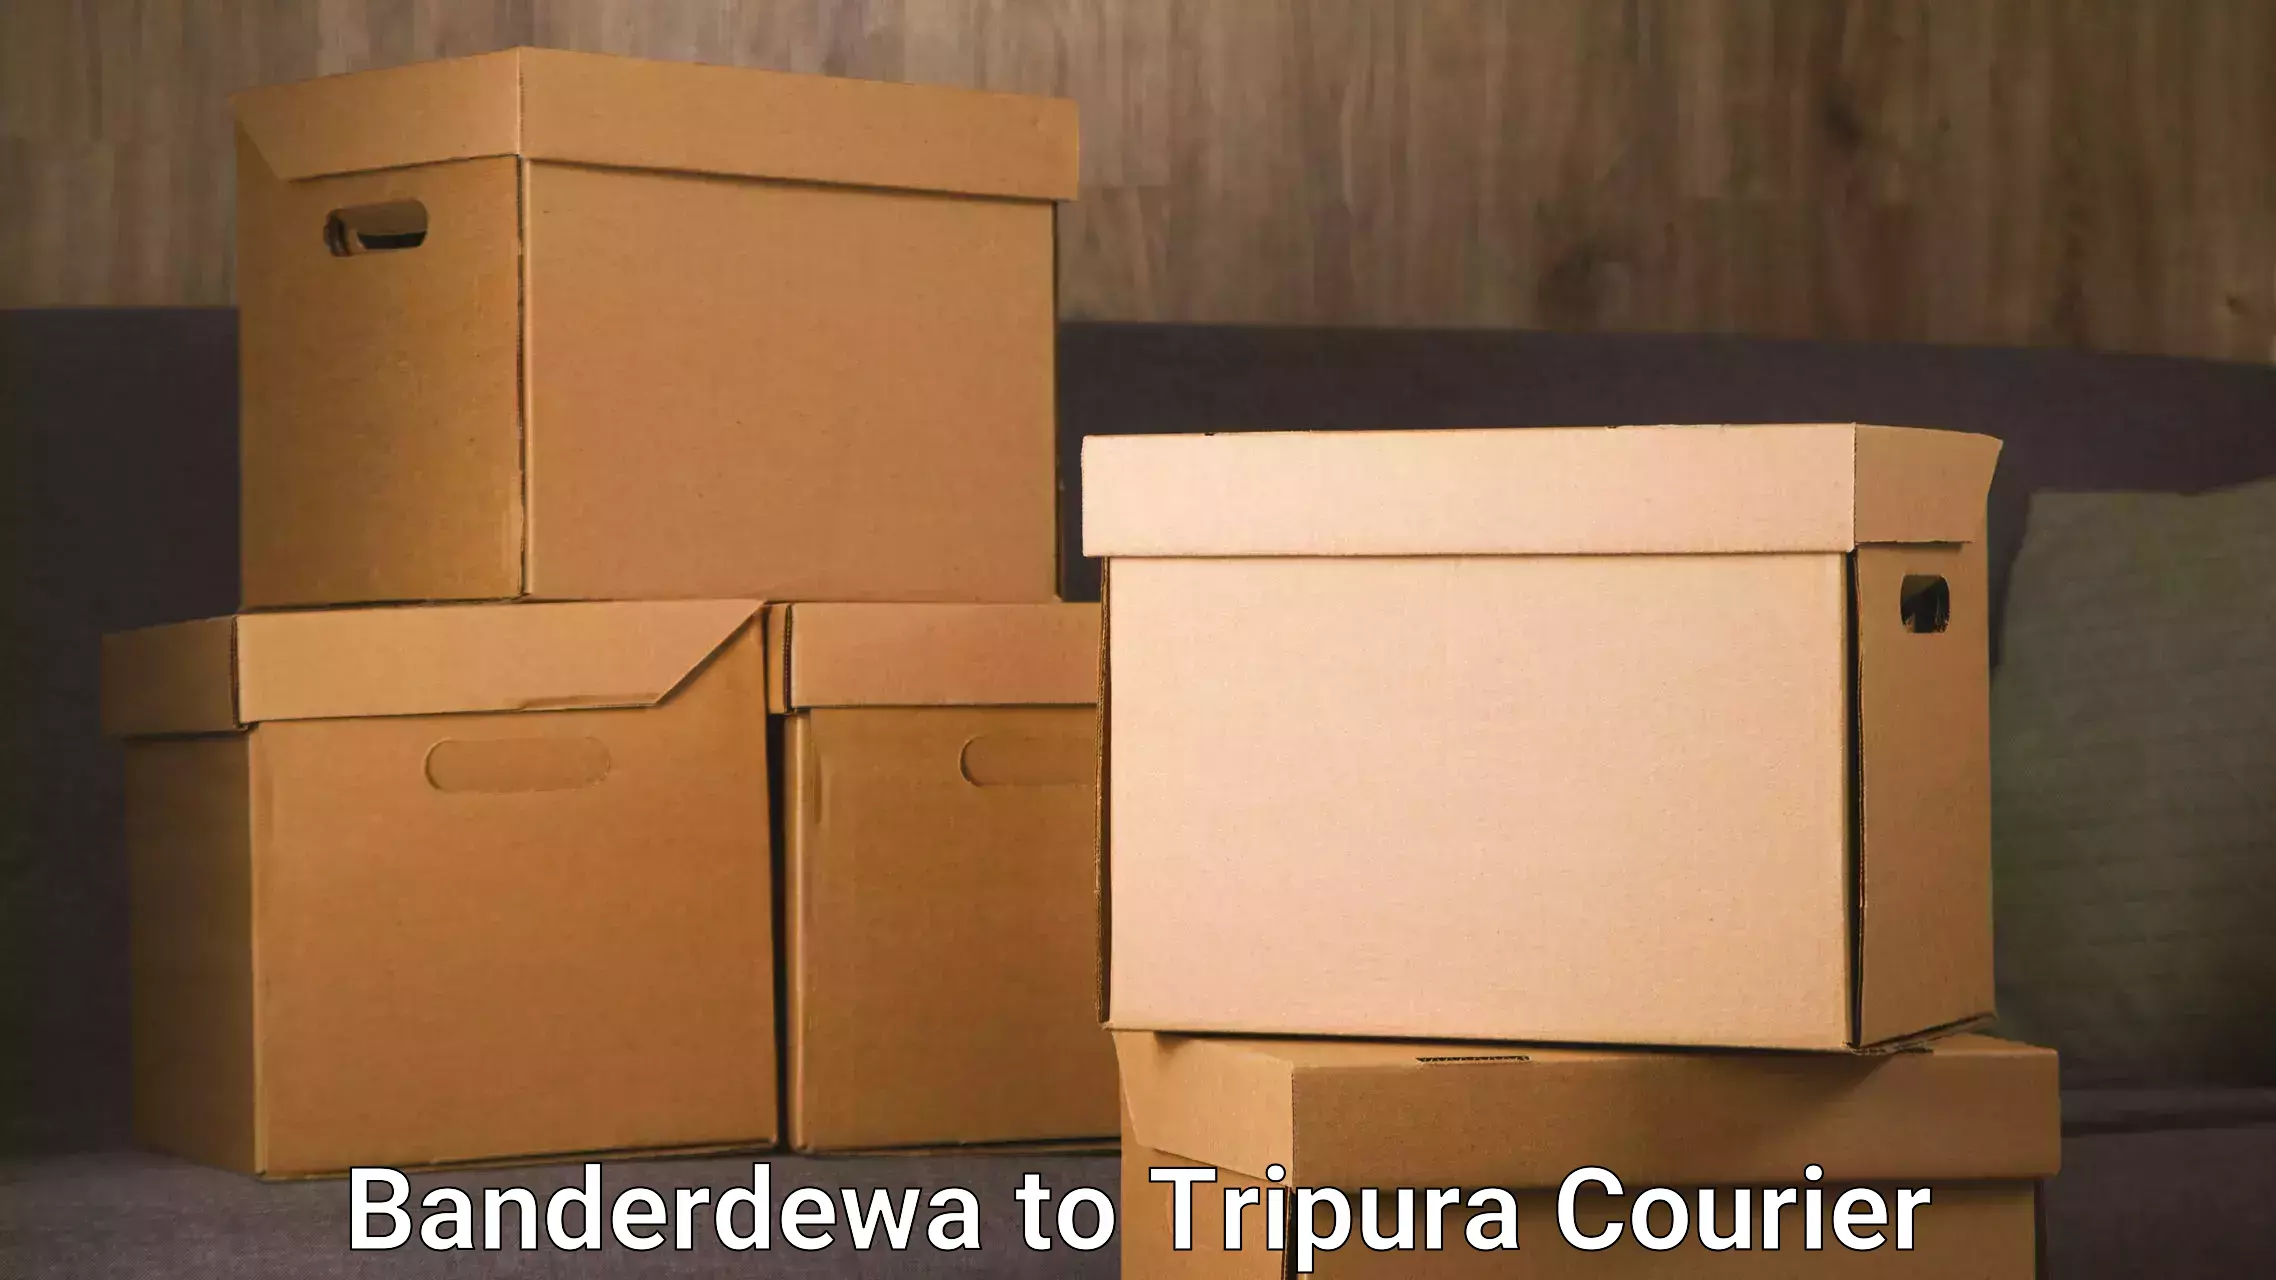 Reliable courier service Banderdewa to Udaipur Tripura